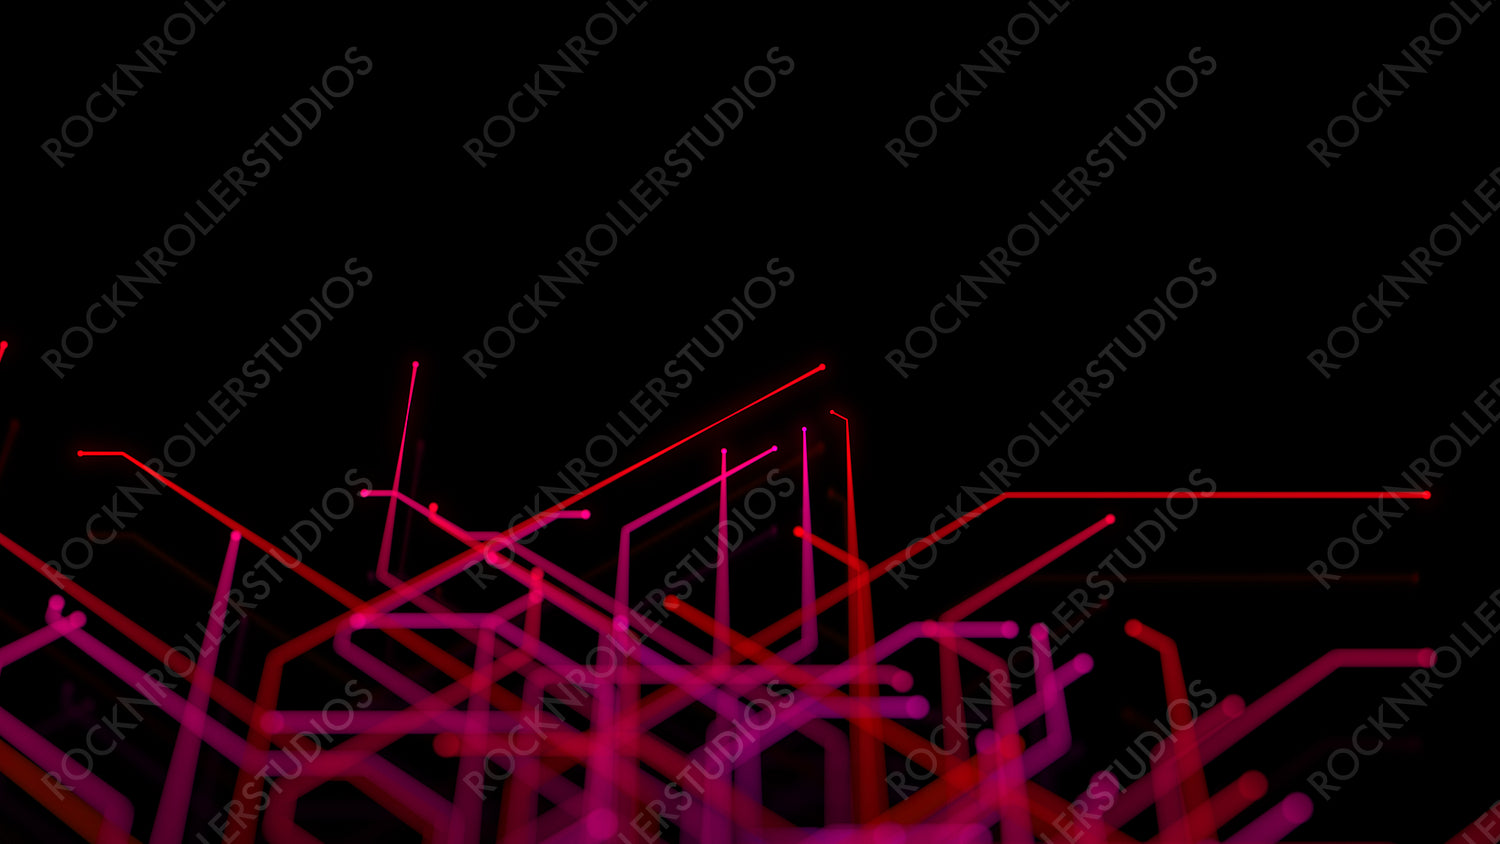 Computing Concept with High-Tech Mesh. Red and Pink Futuristic Digital Lines with copy-space.